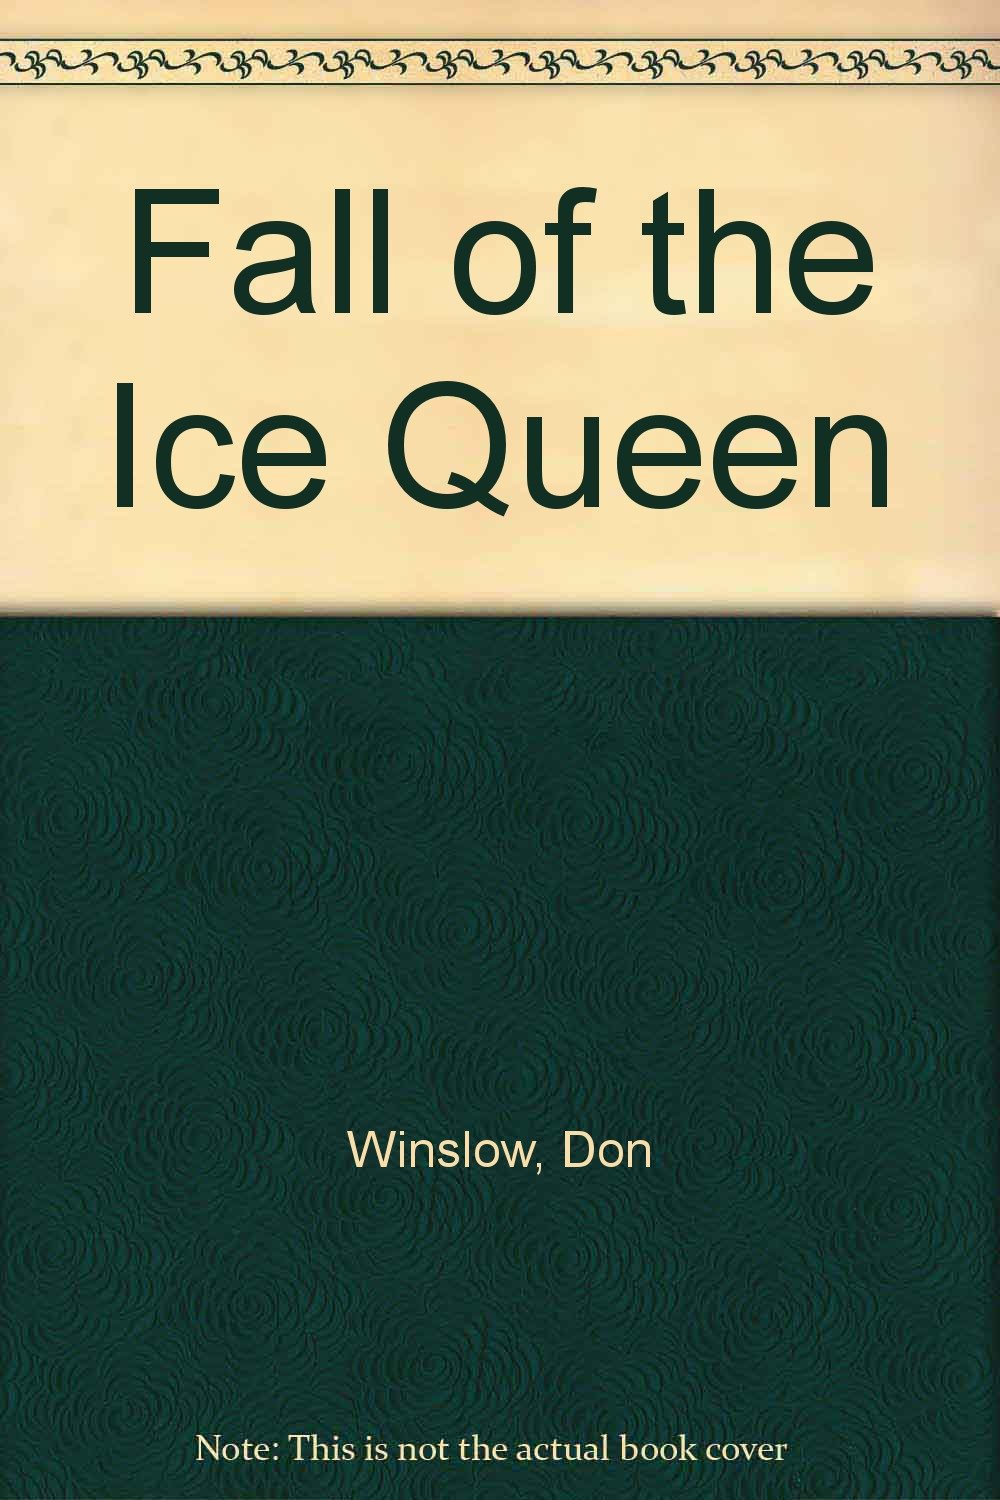 The fall of the ice queen